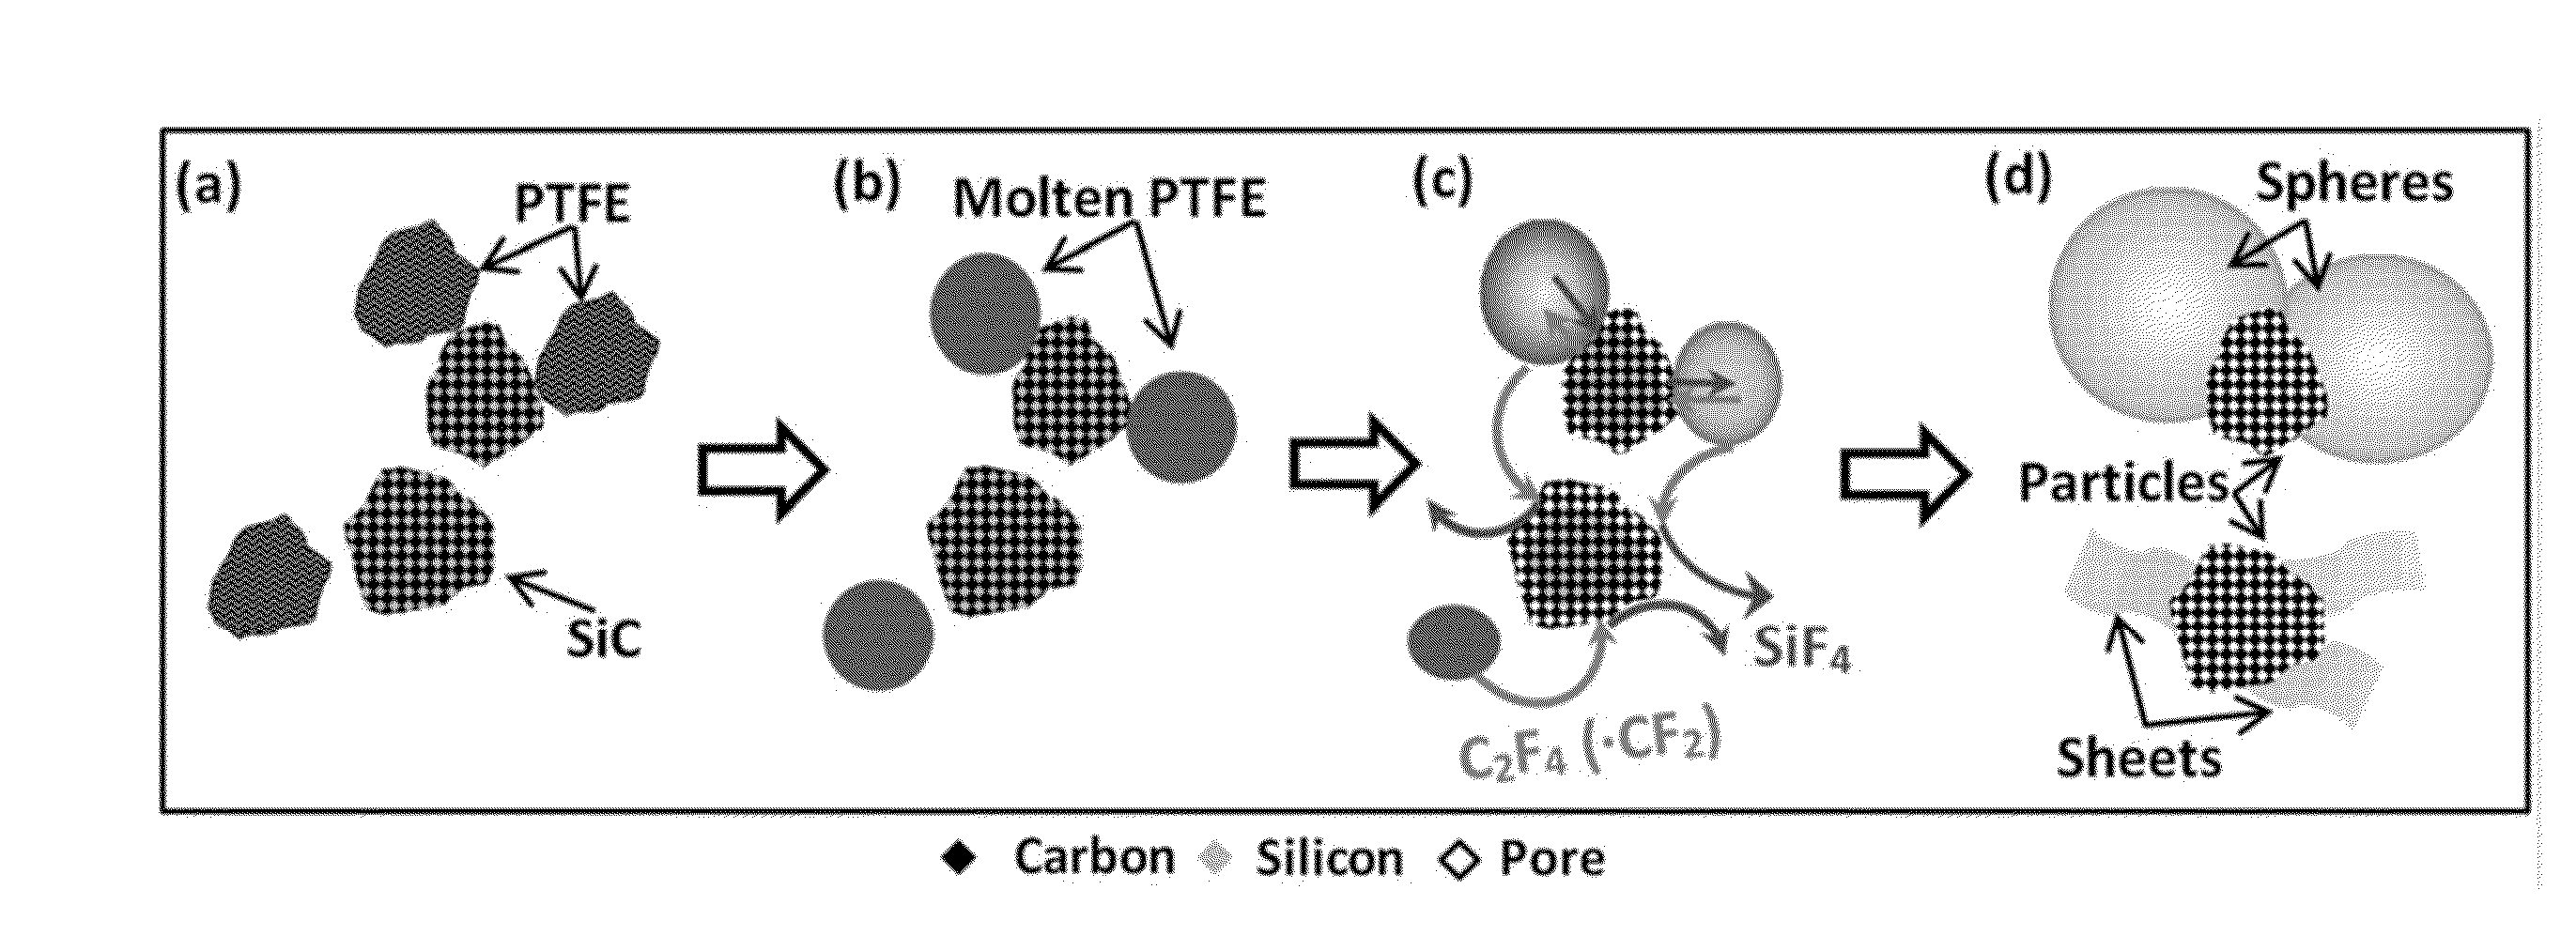 Combustion synthesis of graphene and carbonous nanomaterials